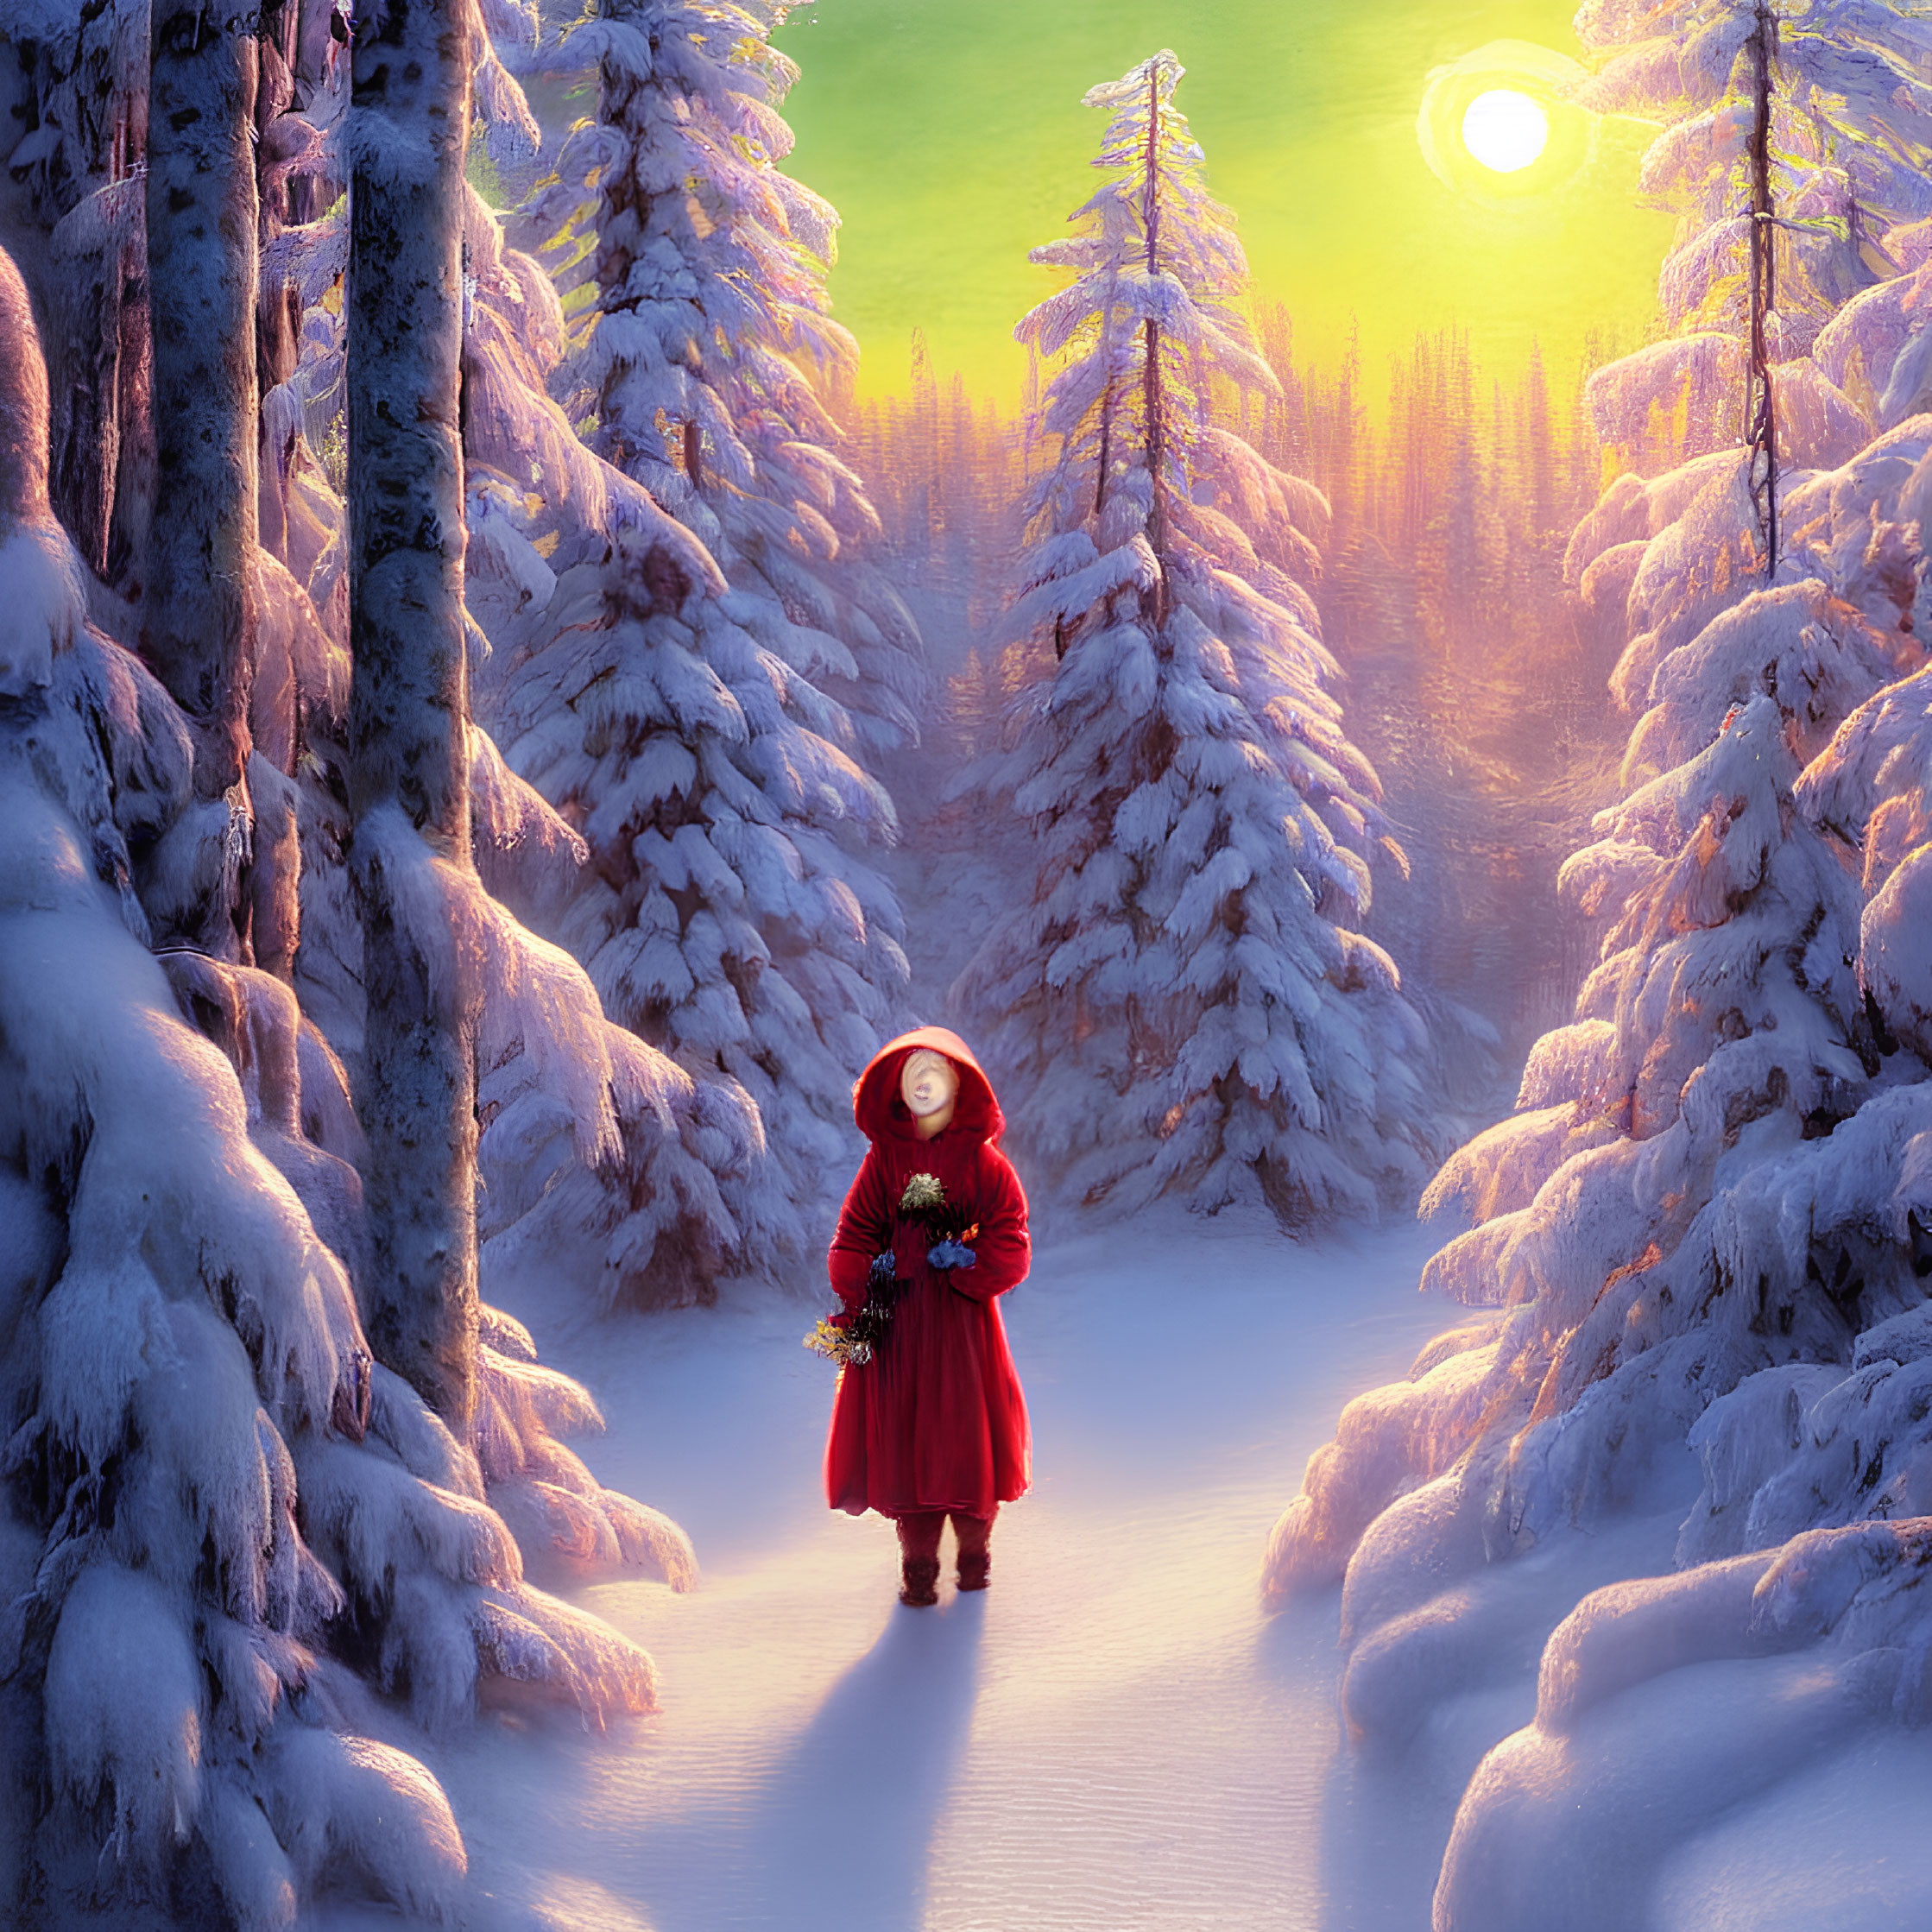 Person in Red Cloak Standing Among Snow-Laden Trees in Serene Winter Landscape